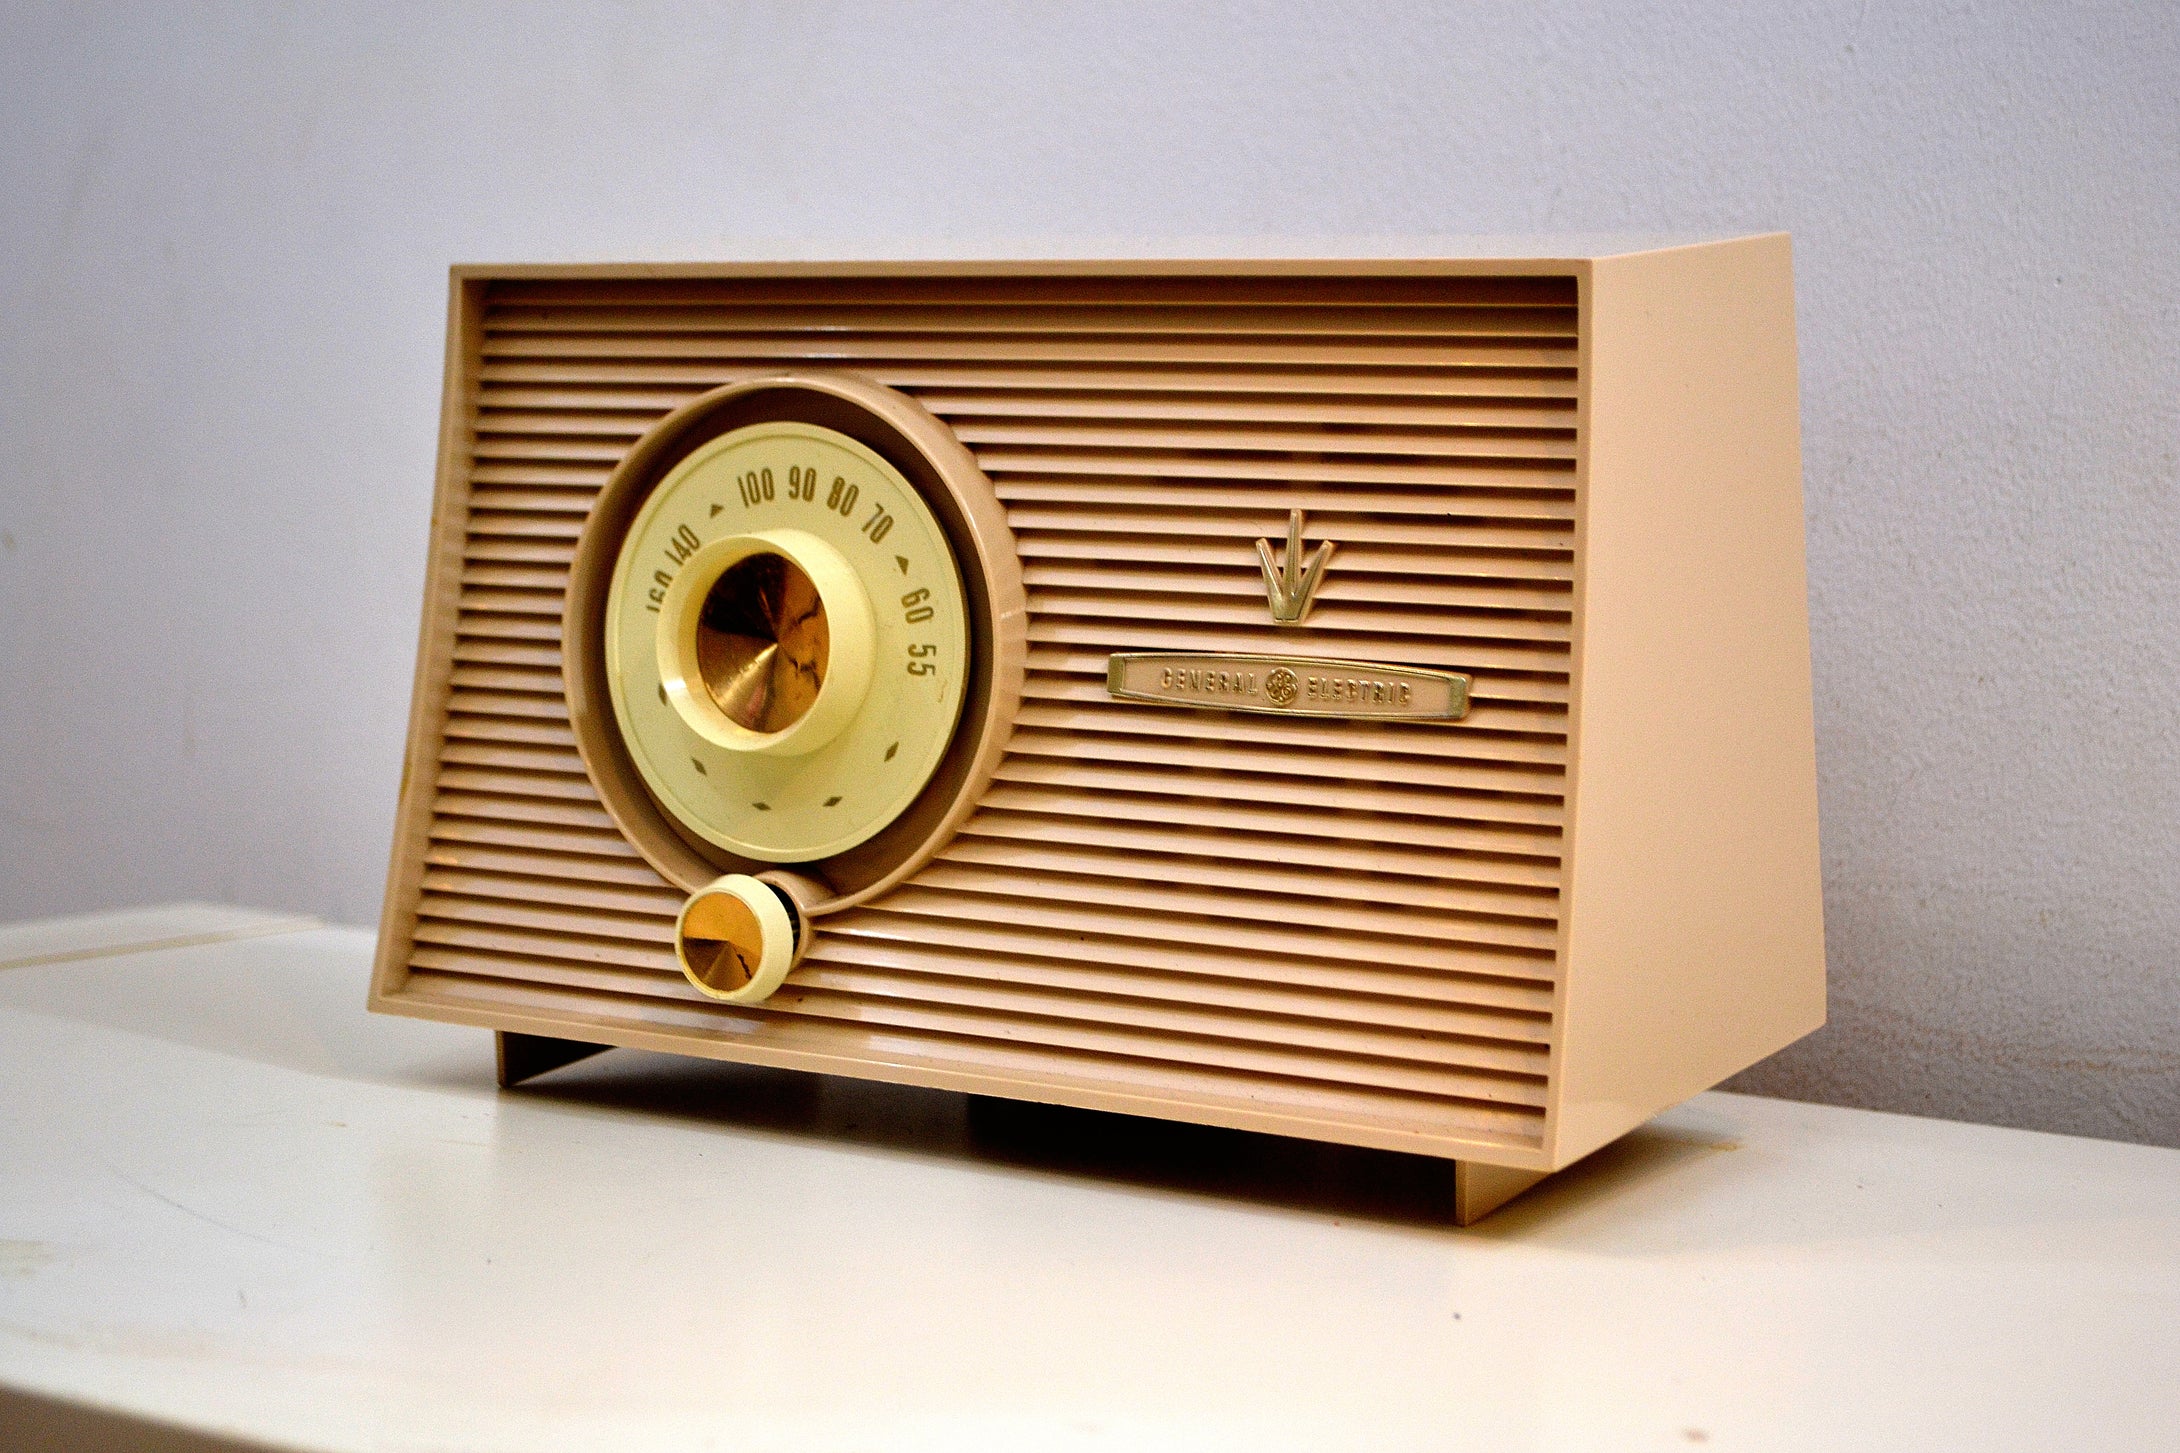 Taupe Beige 1956-1958 General Electric Model 875 AM Vacuum Tube Radio a Little Blaster! - [product_type} - General Electric - Retro Radio Farm